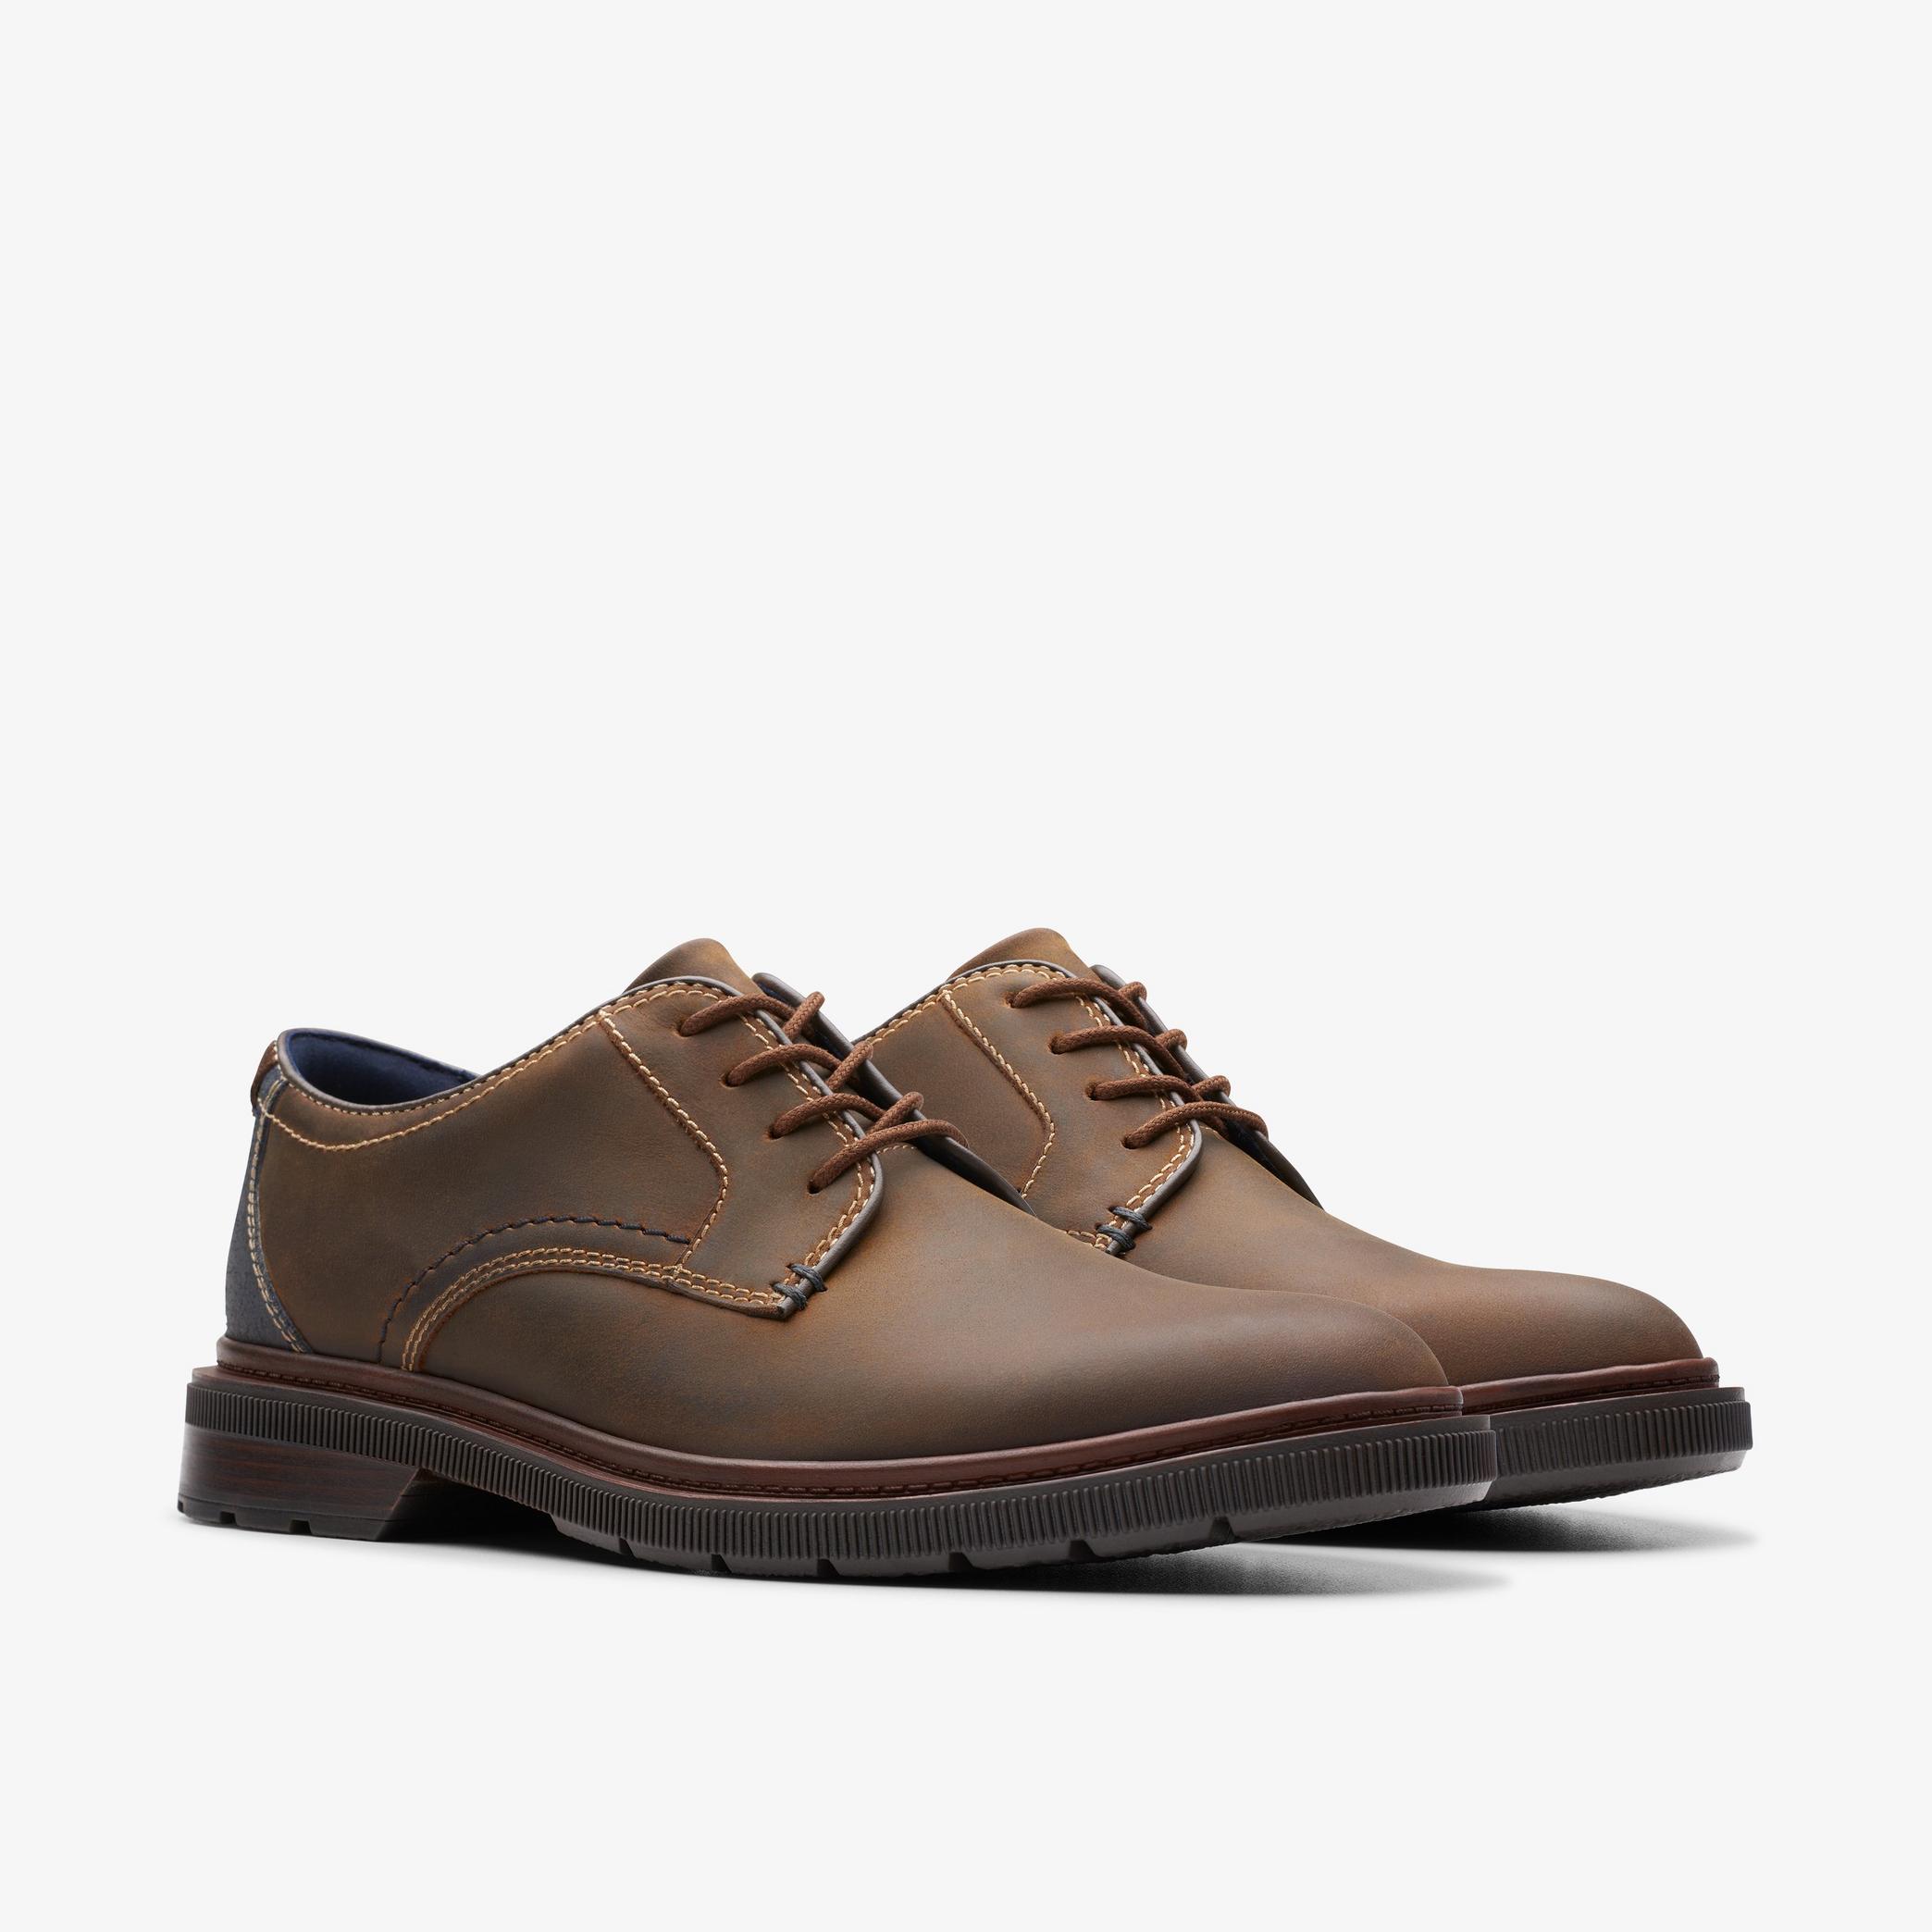 MENS Burchill Derby Beeswax Leather Brogues | Clarks Outlet